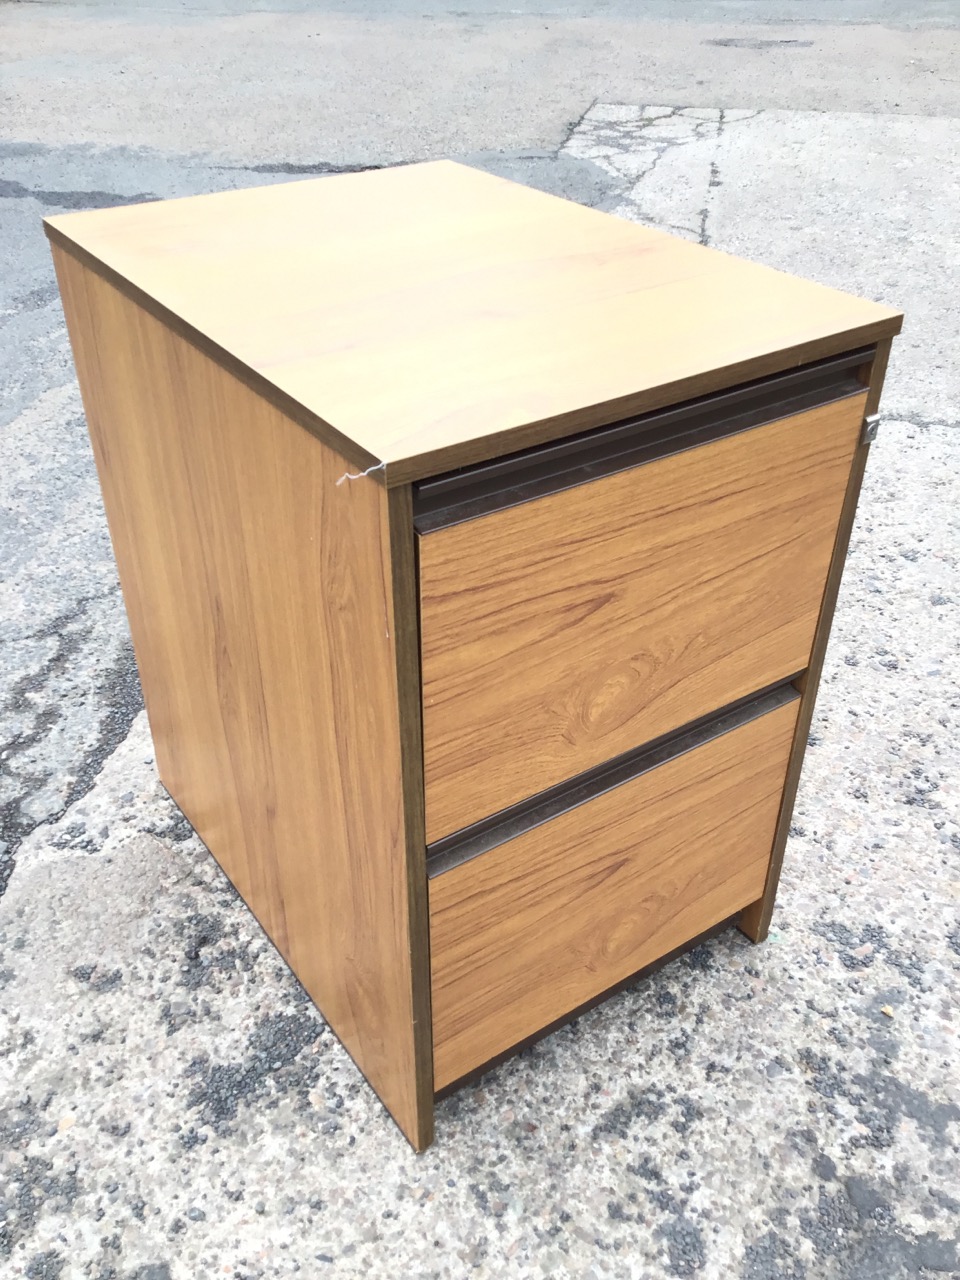 A modern teak effect two-drawer filing cabinet. (18.5in x 23.75in x 28.5in) - Image 3 of 3